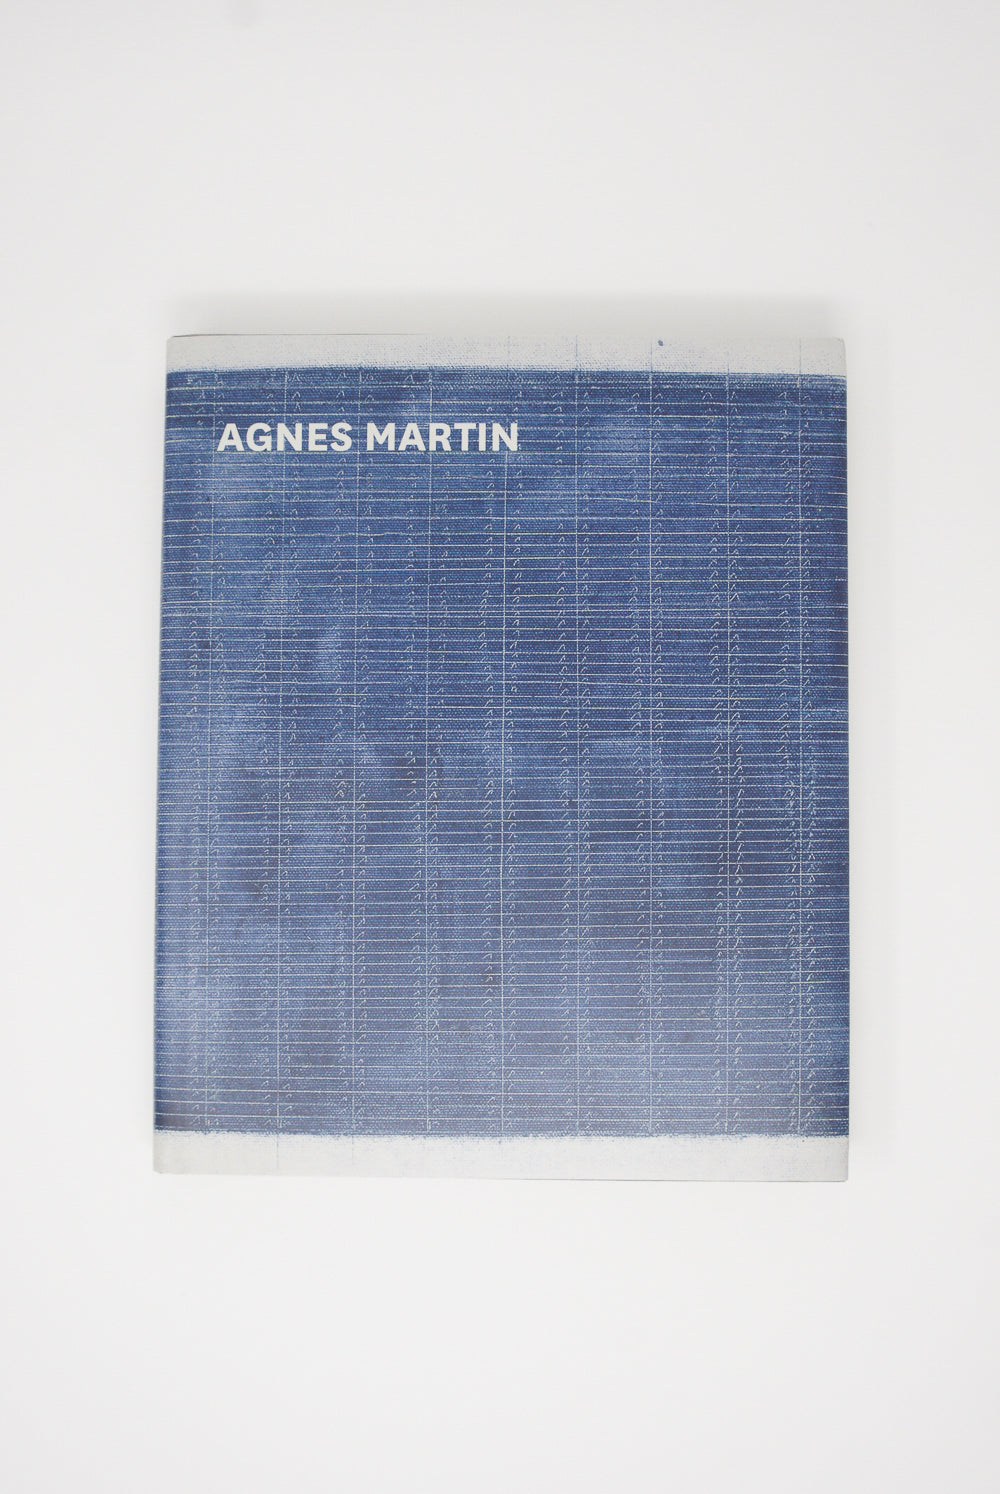 Artbook/D.A.P.'s Agnes Martin's retrospective exhibition of her artistic career, showcased in a book on a white surface.